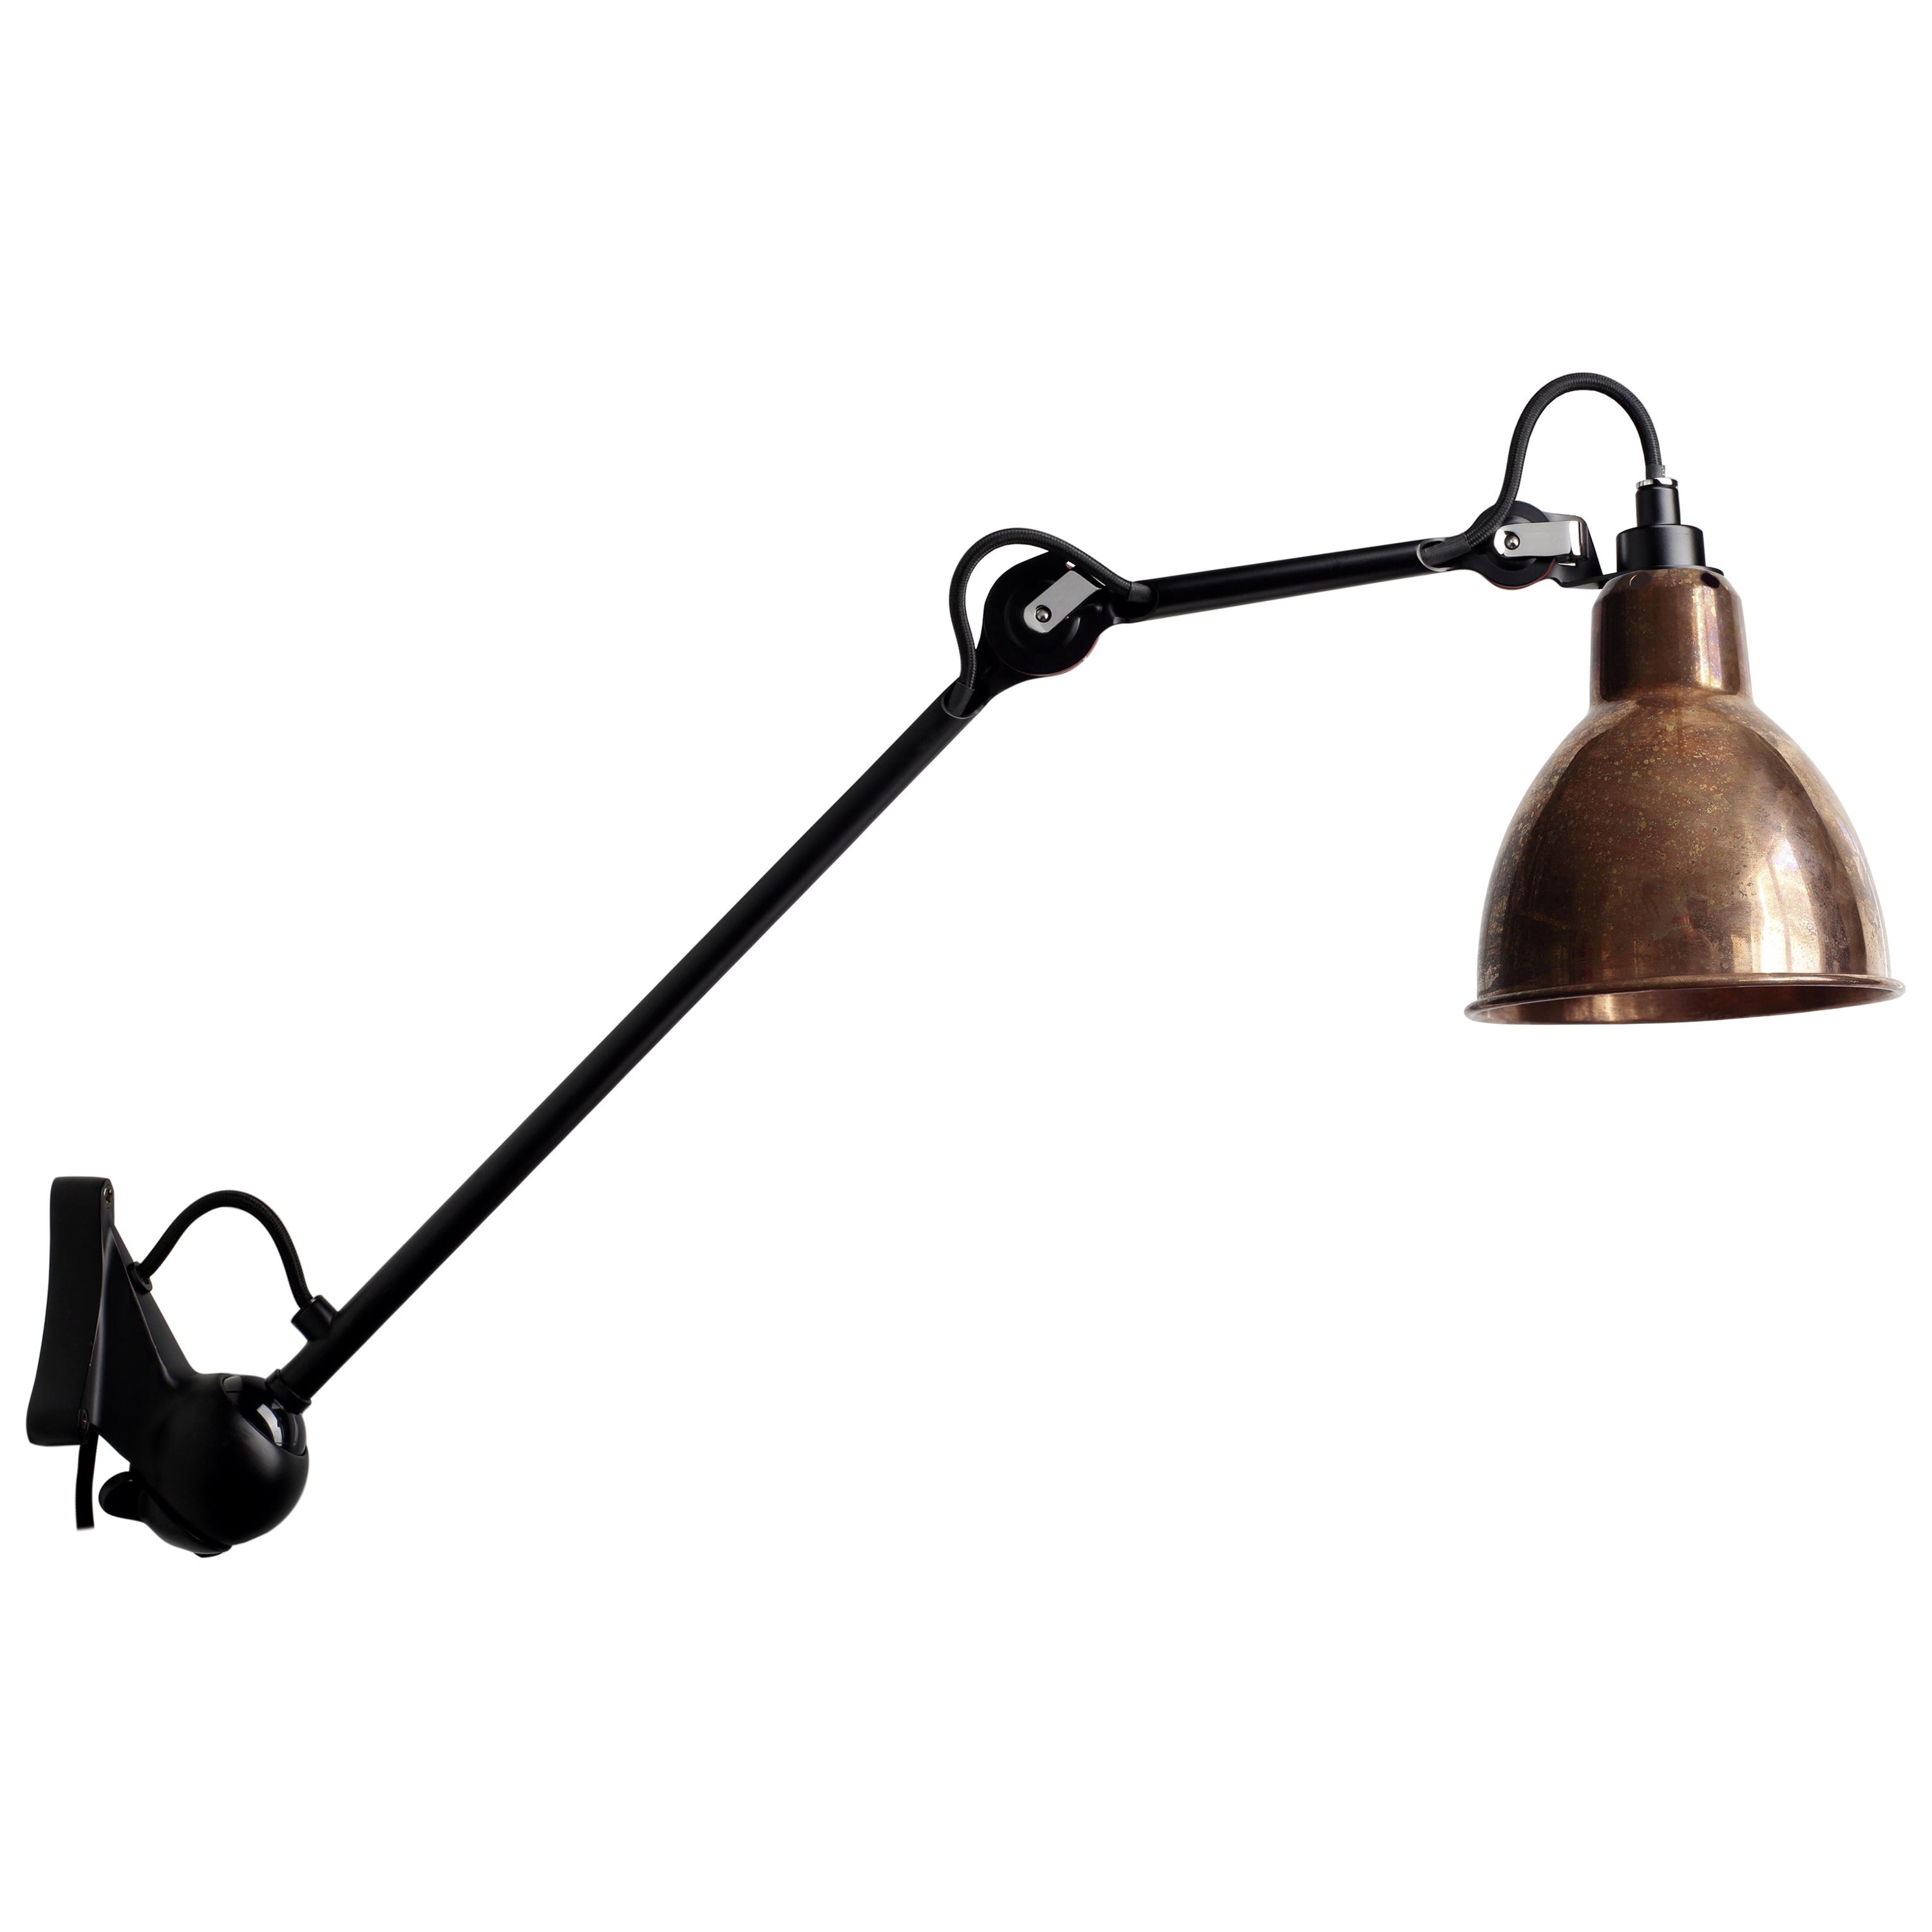 DCW Editions La Lampe Gras N°222 Wall Lamp in Black Arm and Raw Copper Shade